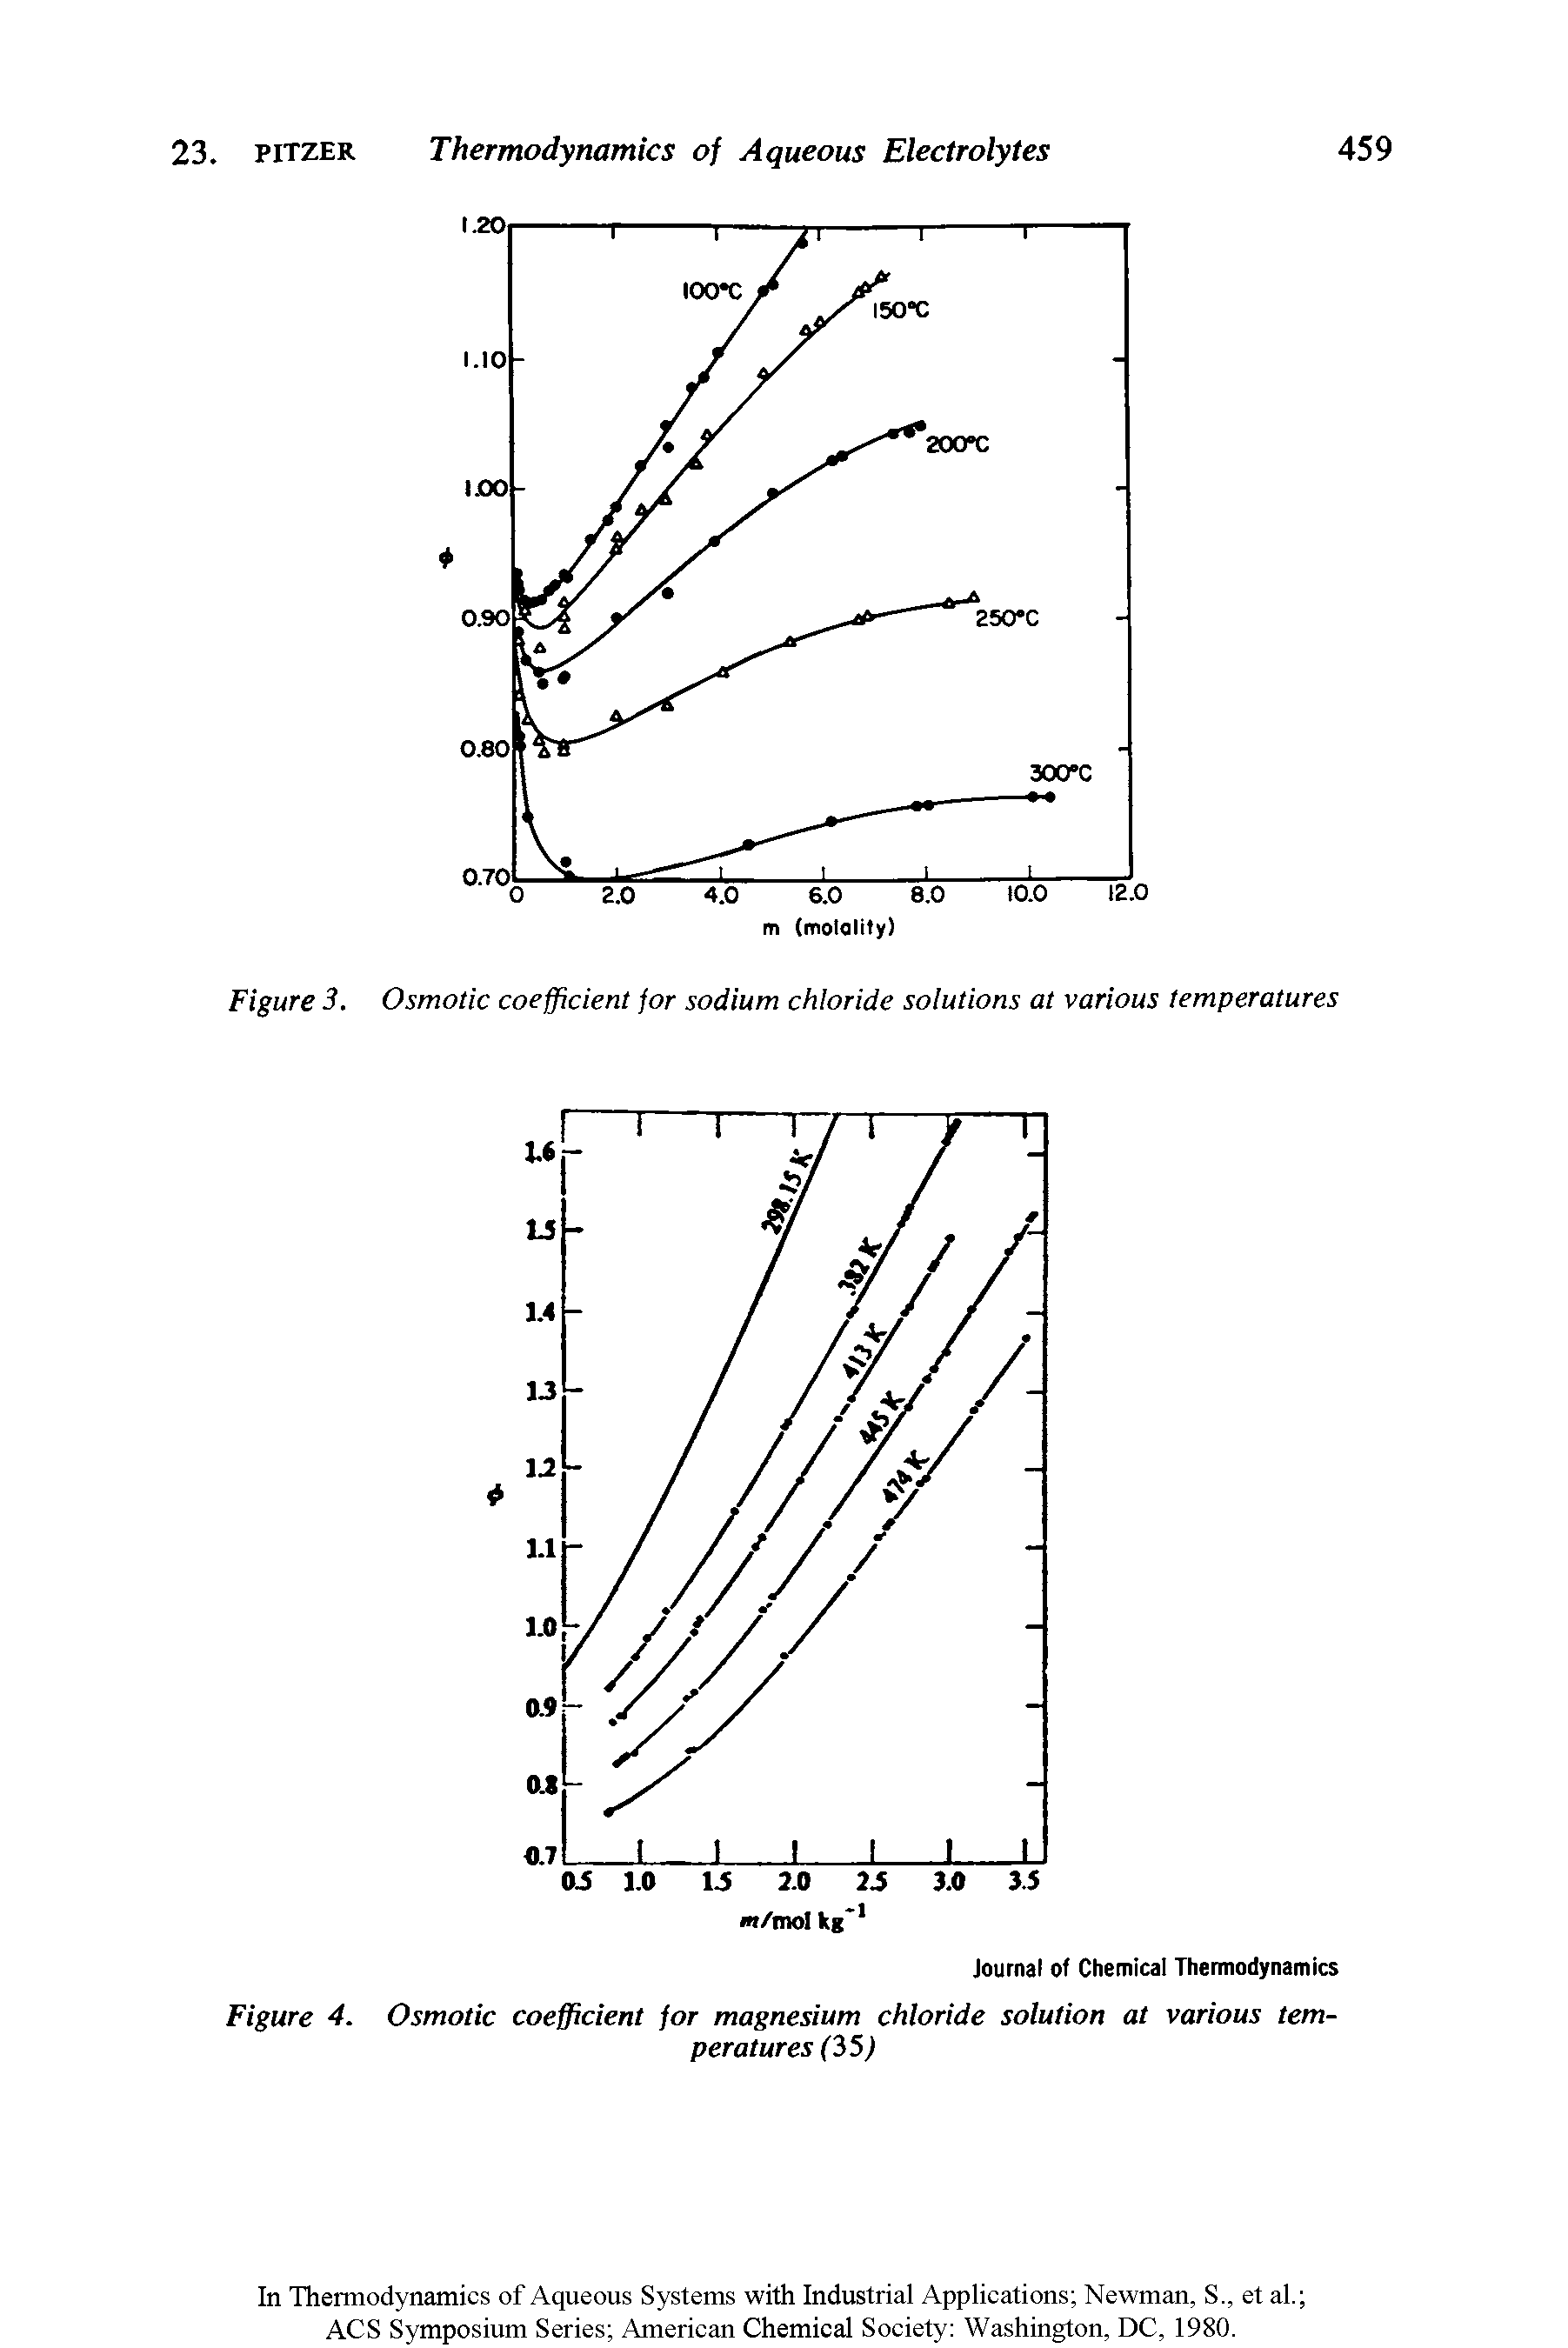 Figure 4. Osmotic coefficient for magnesium chloride solution at various temperatures (35)...